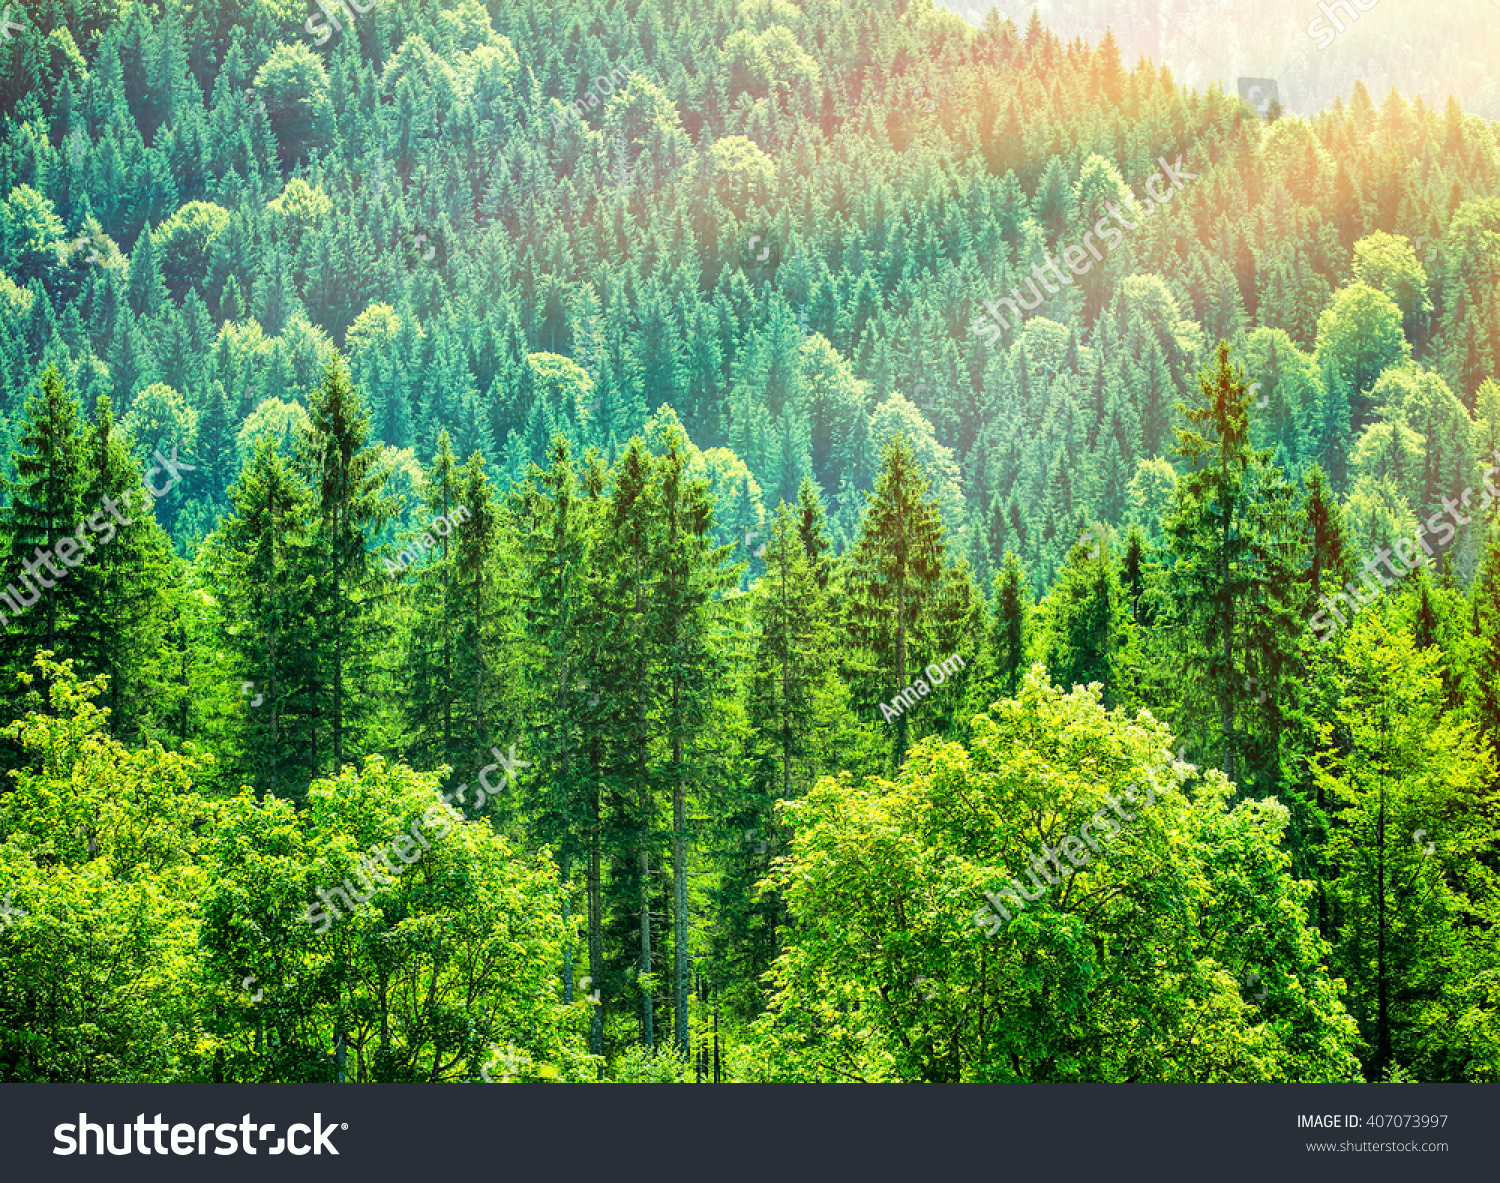 Green tree forest background, beautiful bird eye view on fresh pines in the morning sun light, Europe, Germany, Alpine mountains #407073997